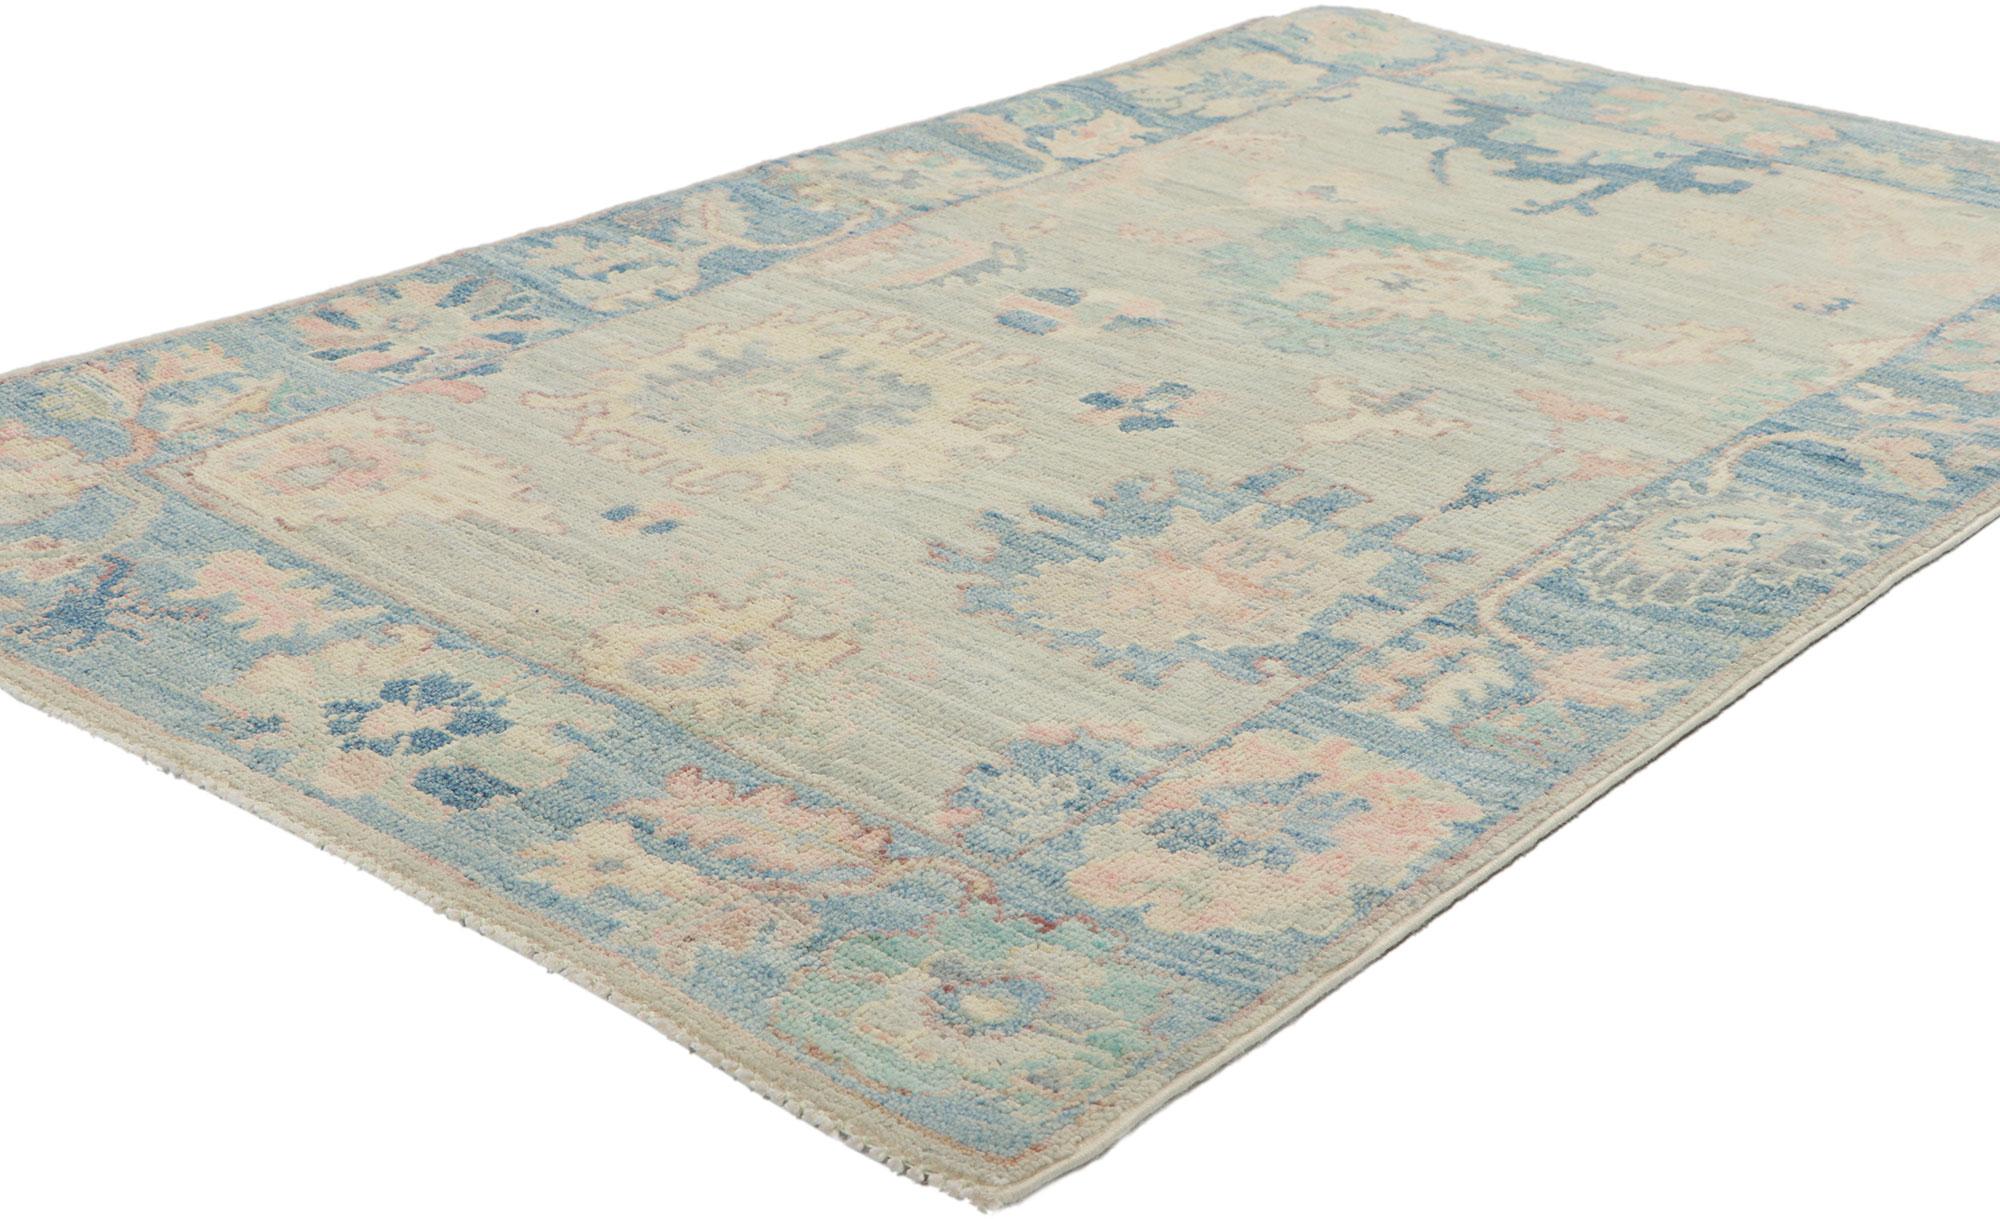 80846 New Modern Style Oushak Rug with Soft Colors, 03'01 x 05'00. Polished and playful, this hand-knotted wool contemporary Contemporary Oushak rug beautifully embodies a modern style. The composition features an all-over botanical pattern composed